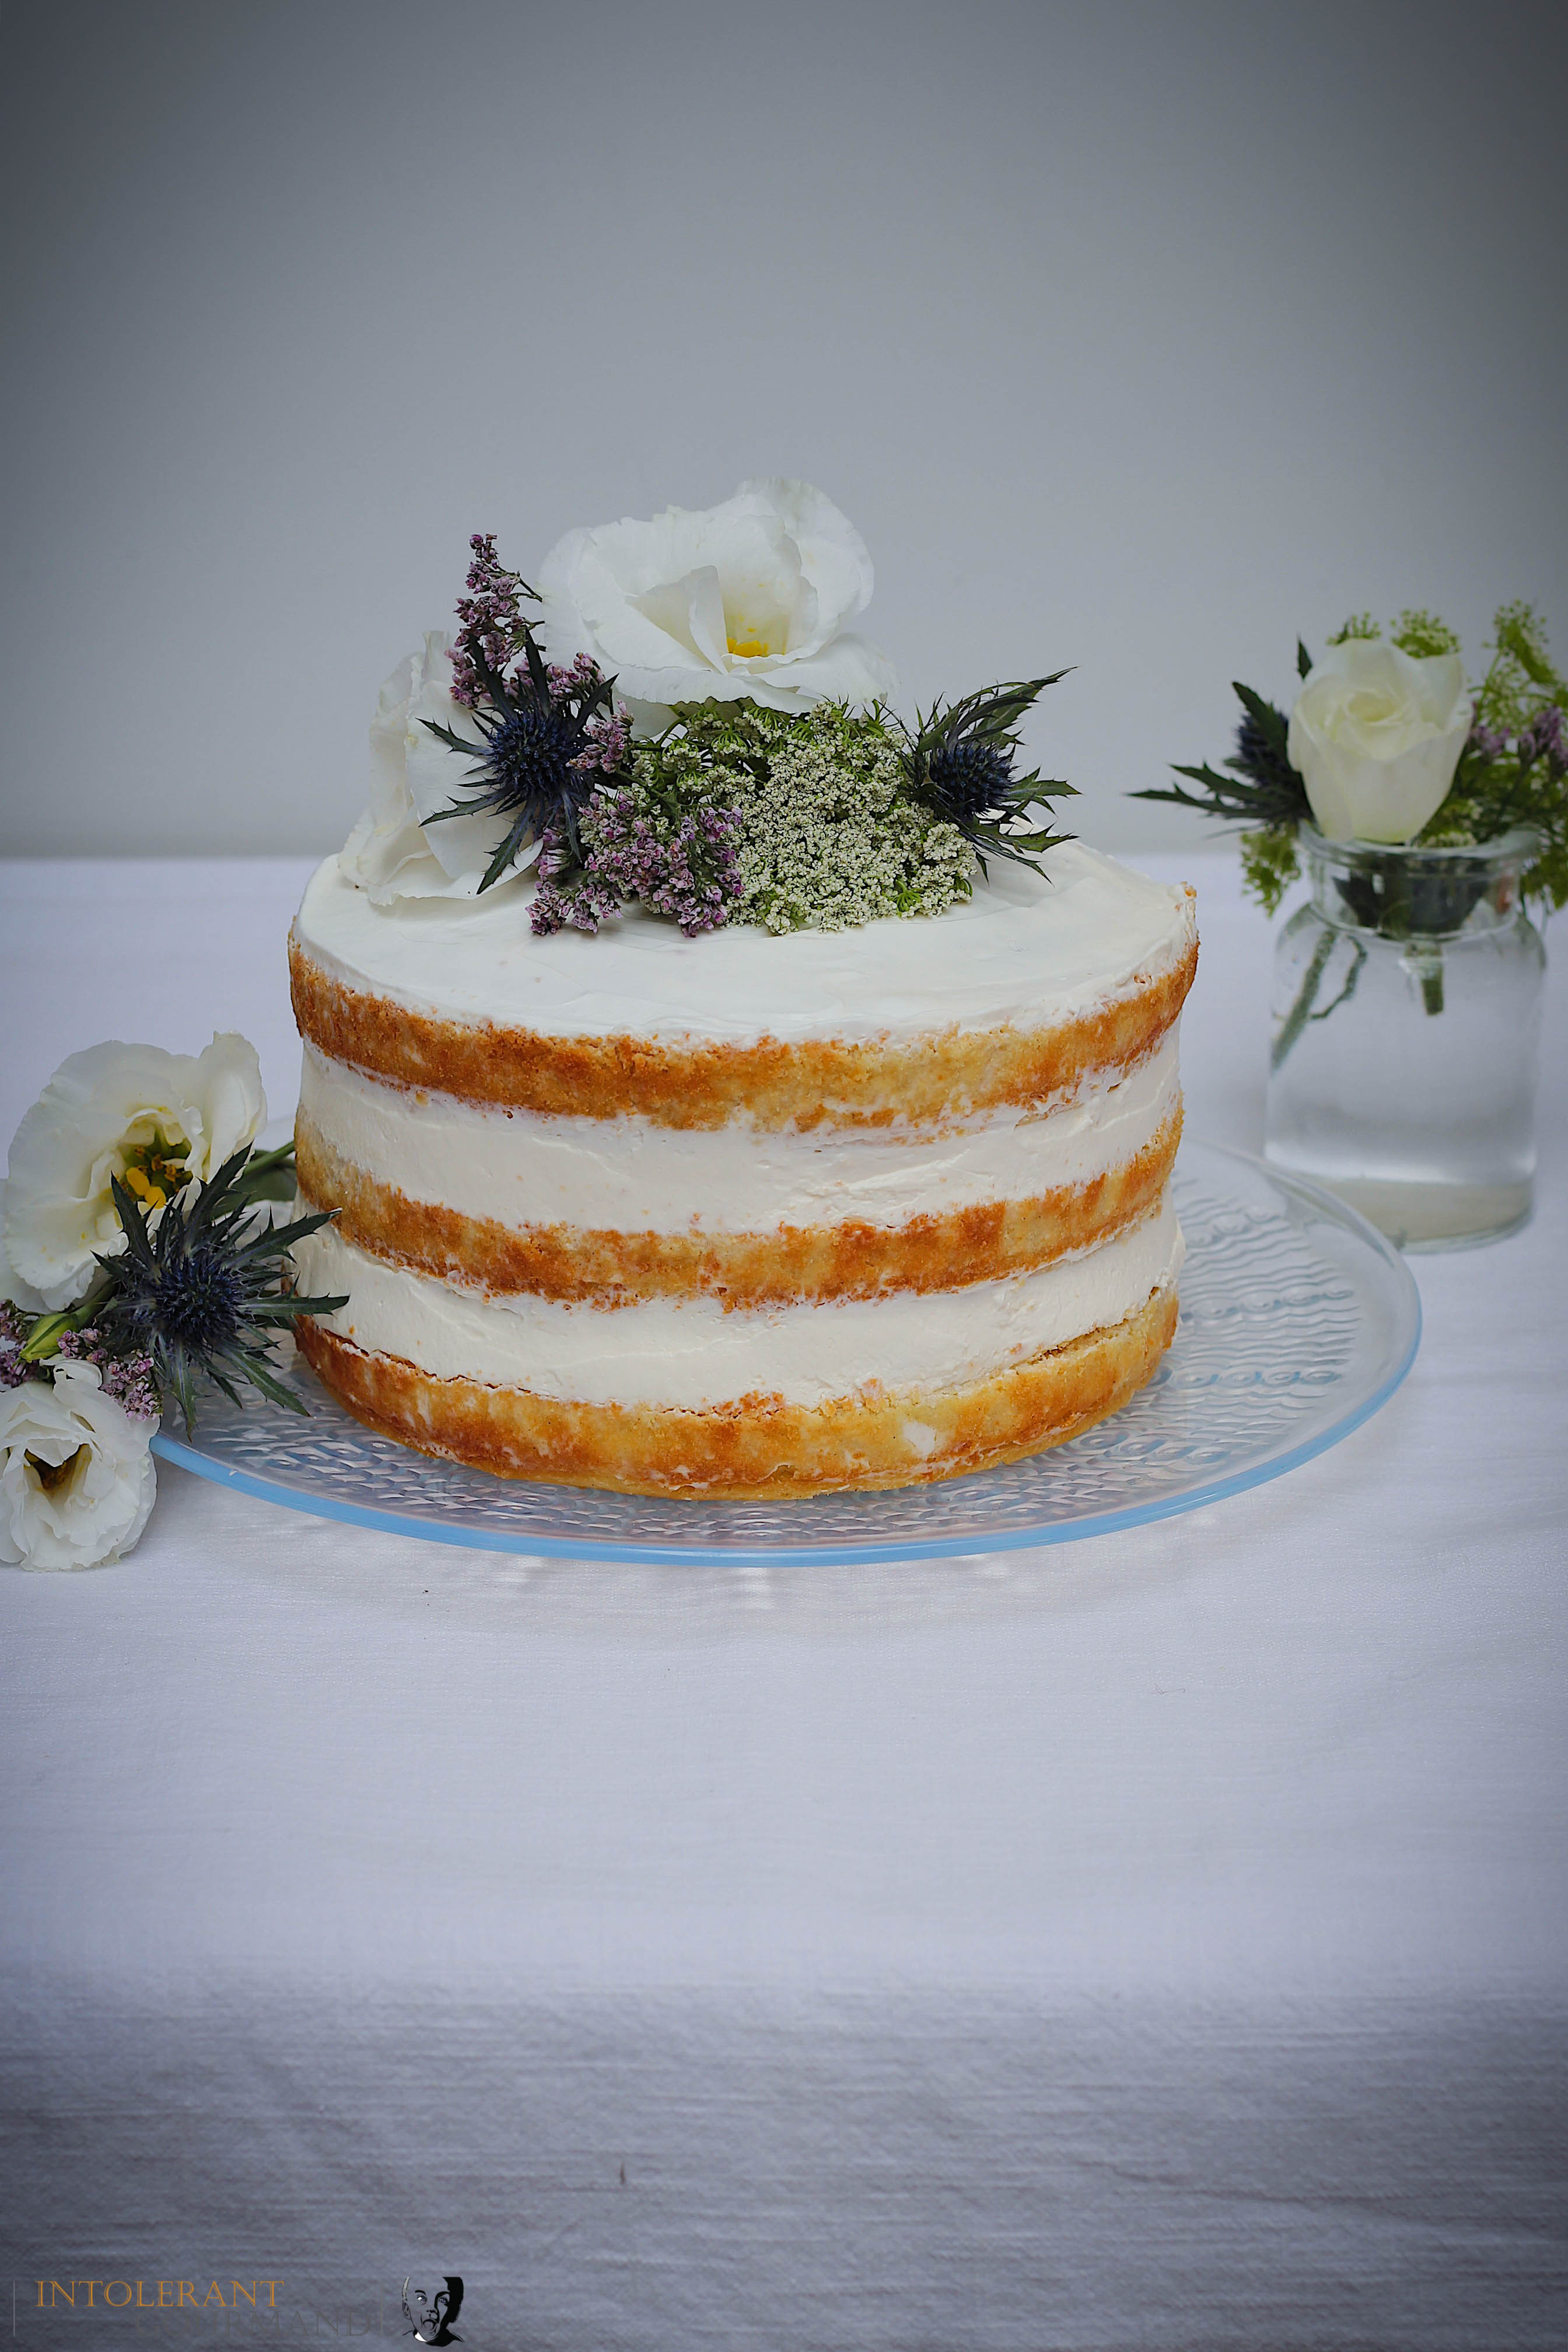 Royal Wedding Cake - Elderflower and lemon cake. A beautiful 3 tiered light and delicate sponge cake, that is gluten-free and dairy-free. Perfect for any celebration, or simply just because! www.intolerantgourmand.com